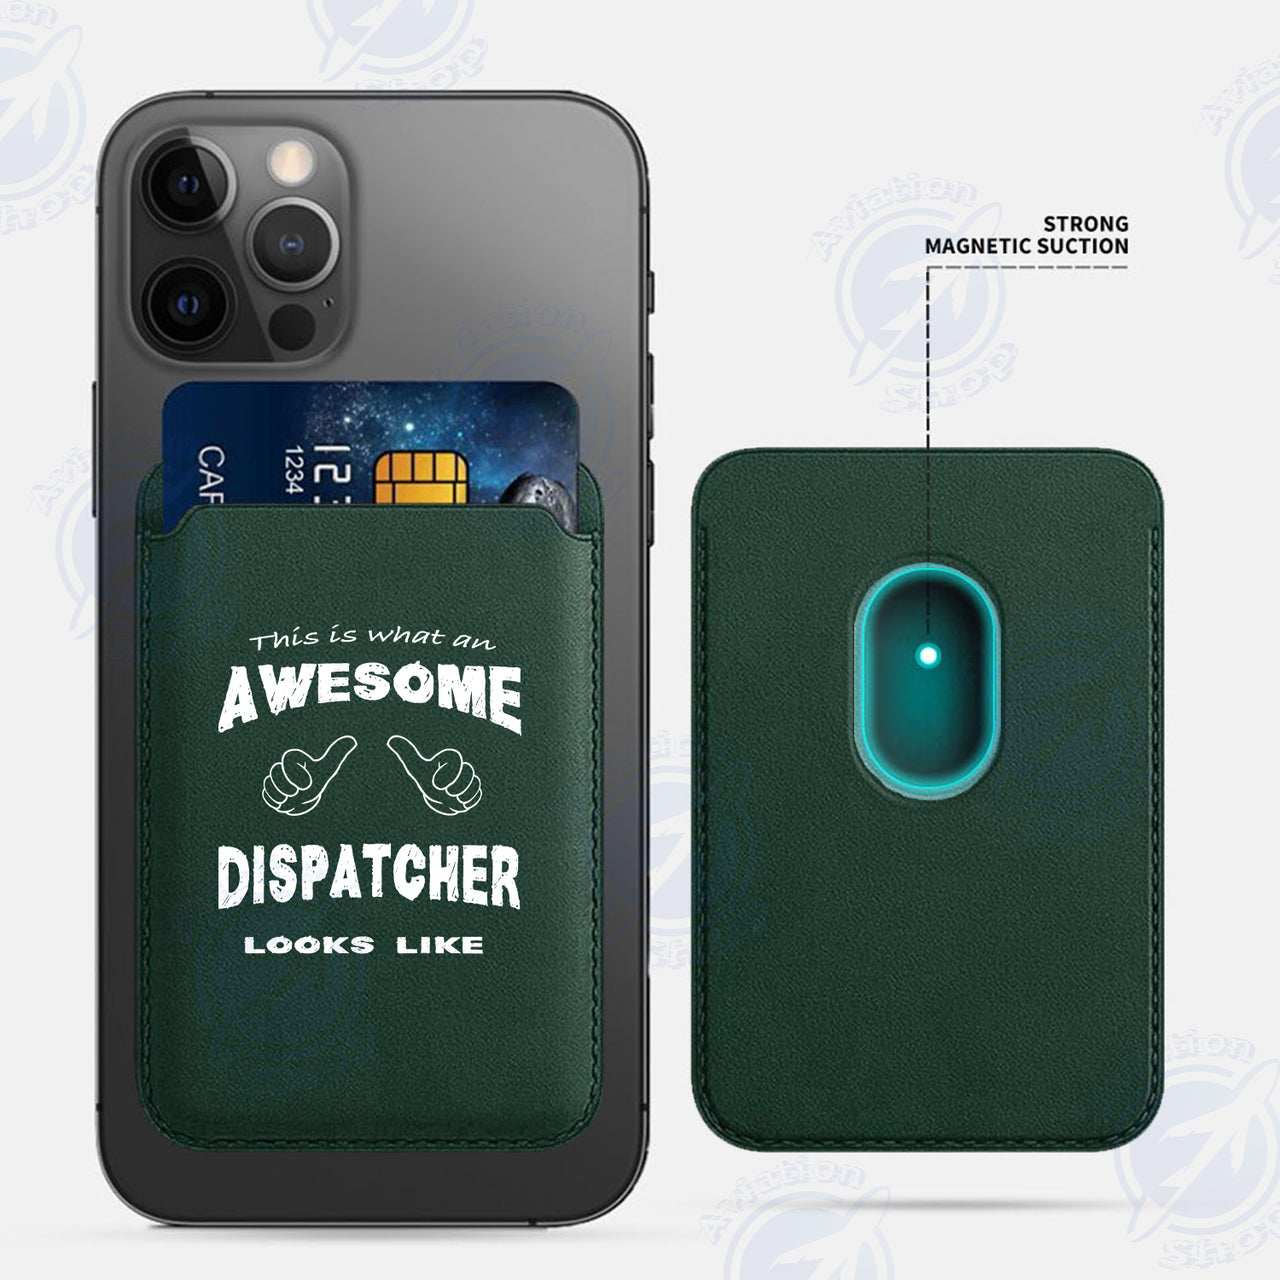 Dispatcher iPhone Cases Magnetic Card Wallet